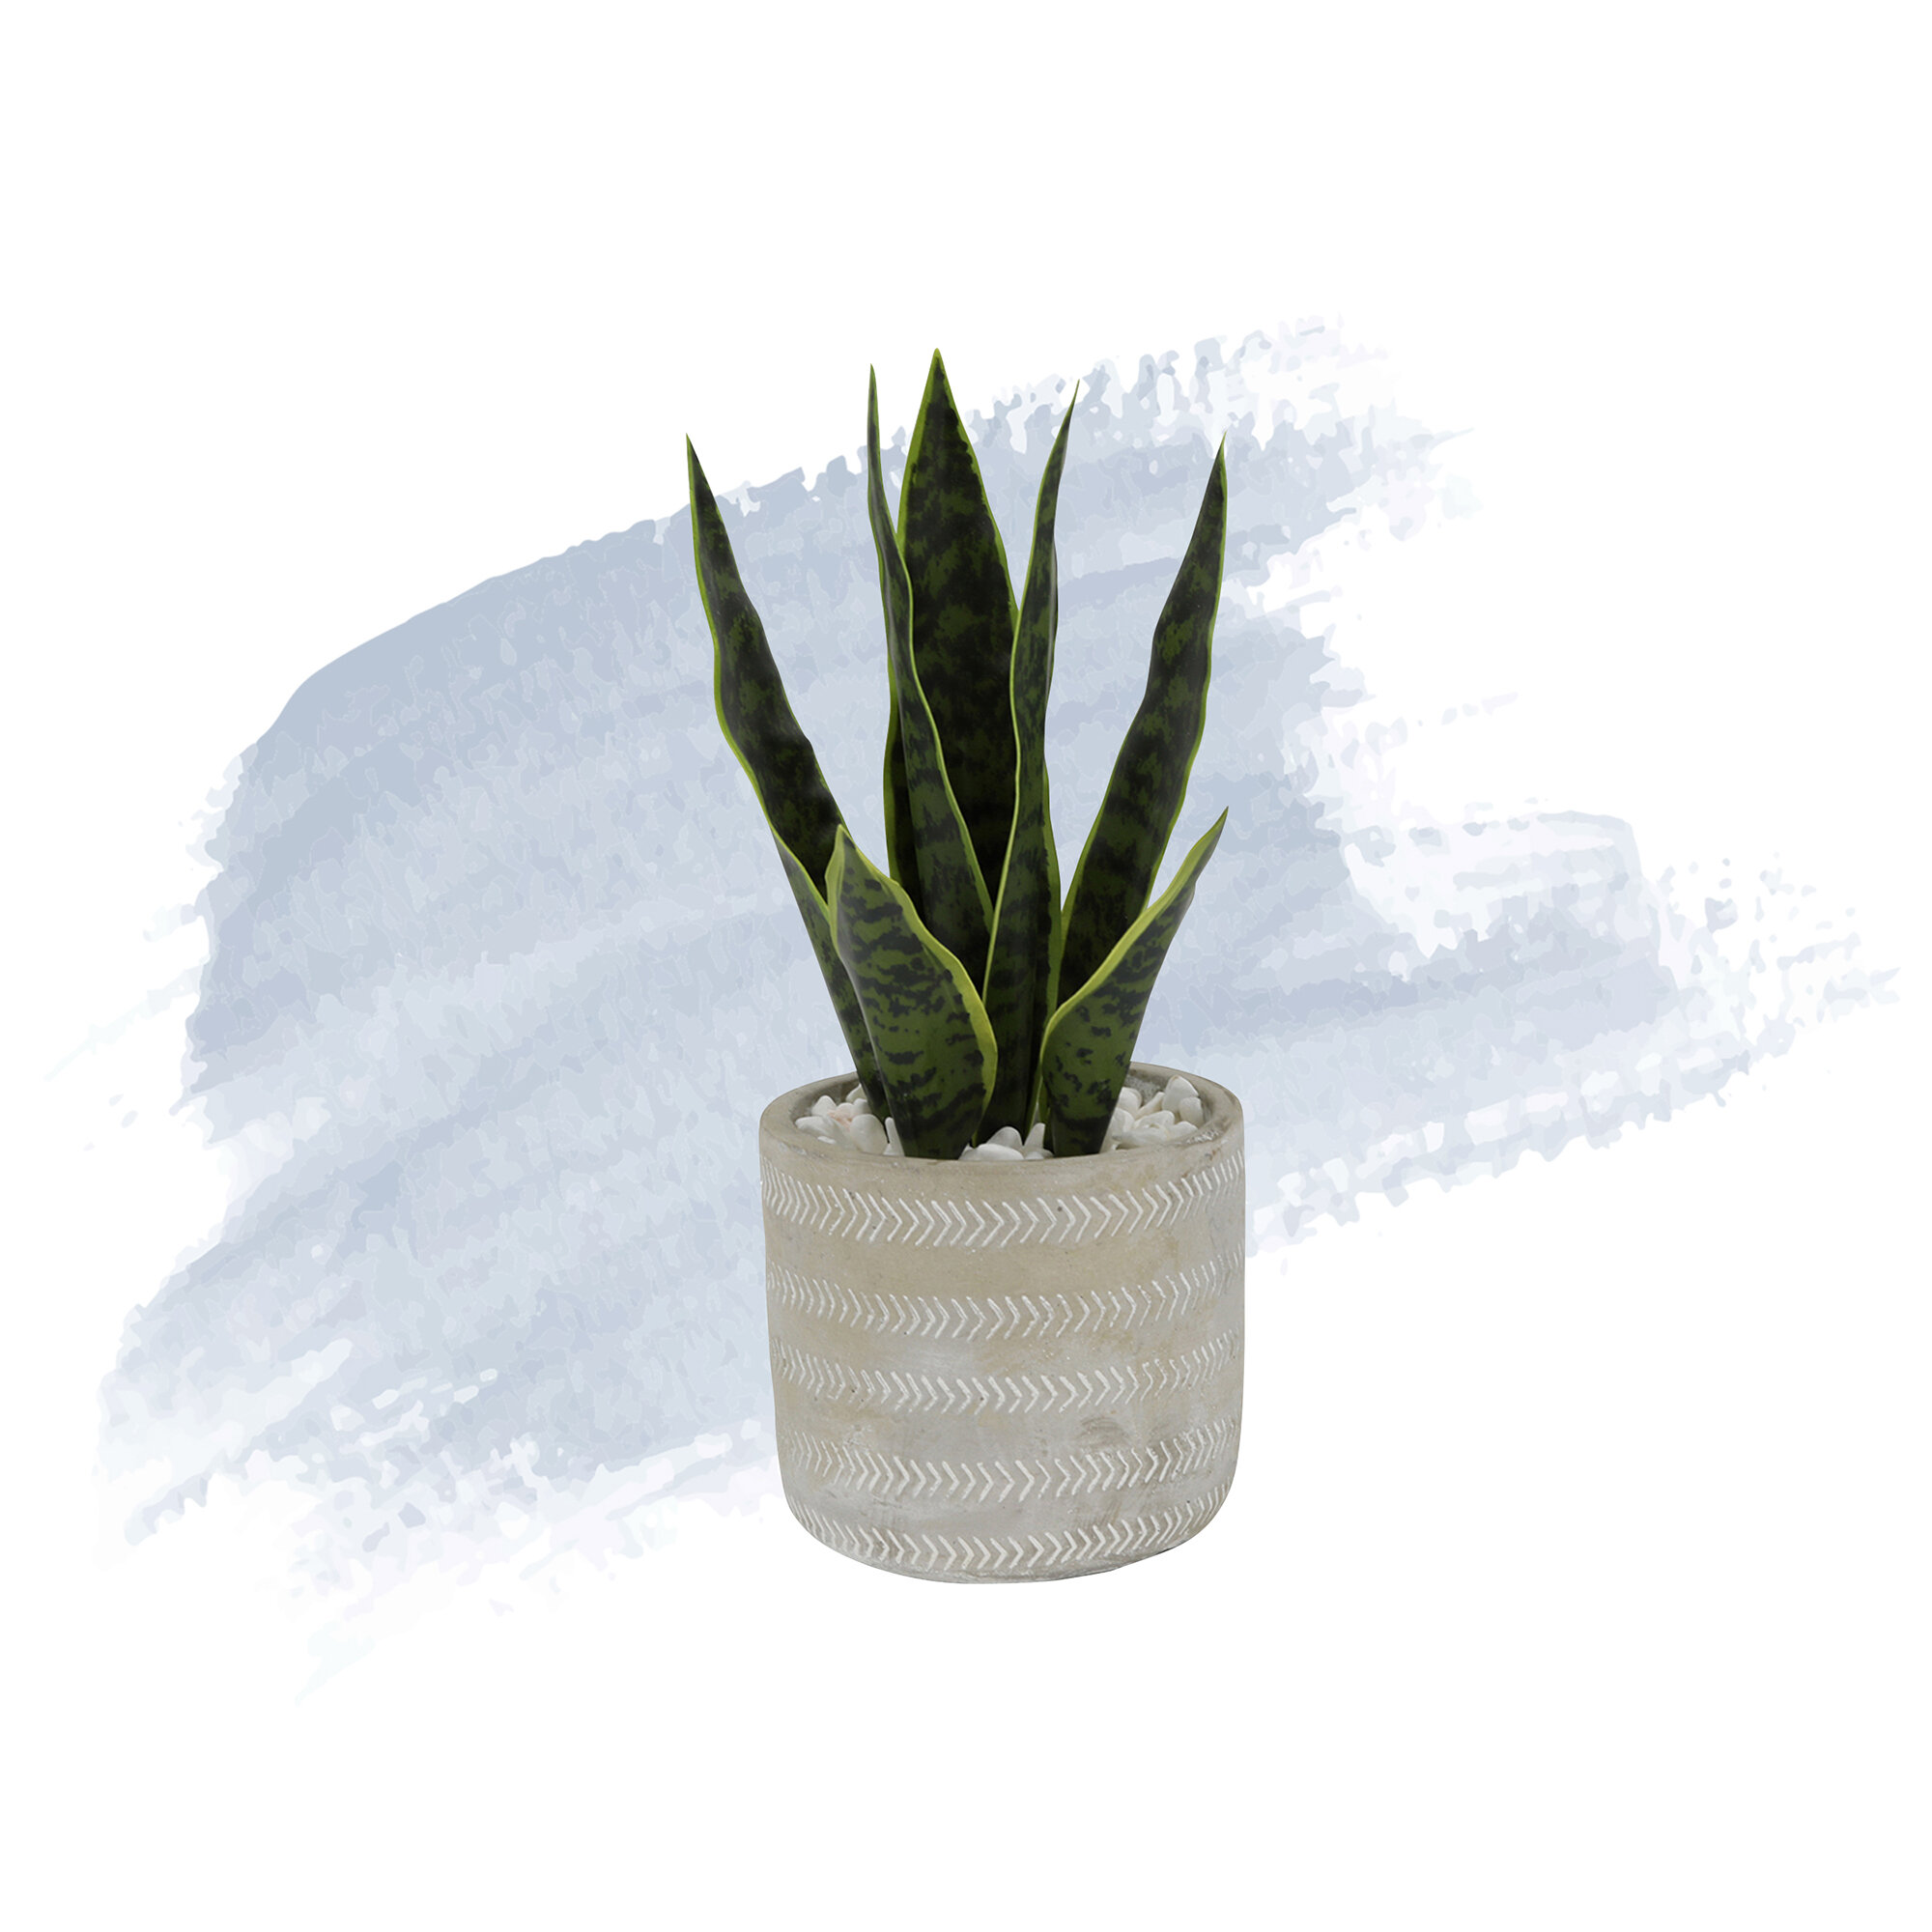 DUZYXI Artificial Snake Plants 16 with White Ceramic Pot Sansevieria Plant  Fake Snake Plant Greenery Faux Snake Plant in Pot for Home Office Living  Room Housewarming Gifts Indoor Outdoor Decor-Green: Artificial 